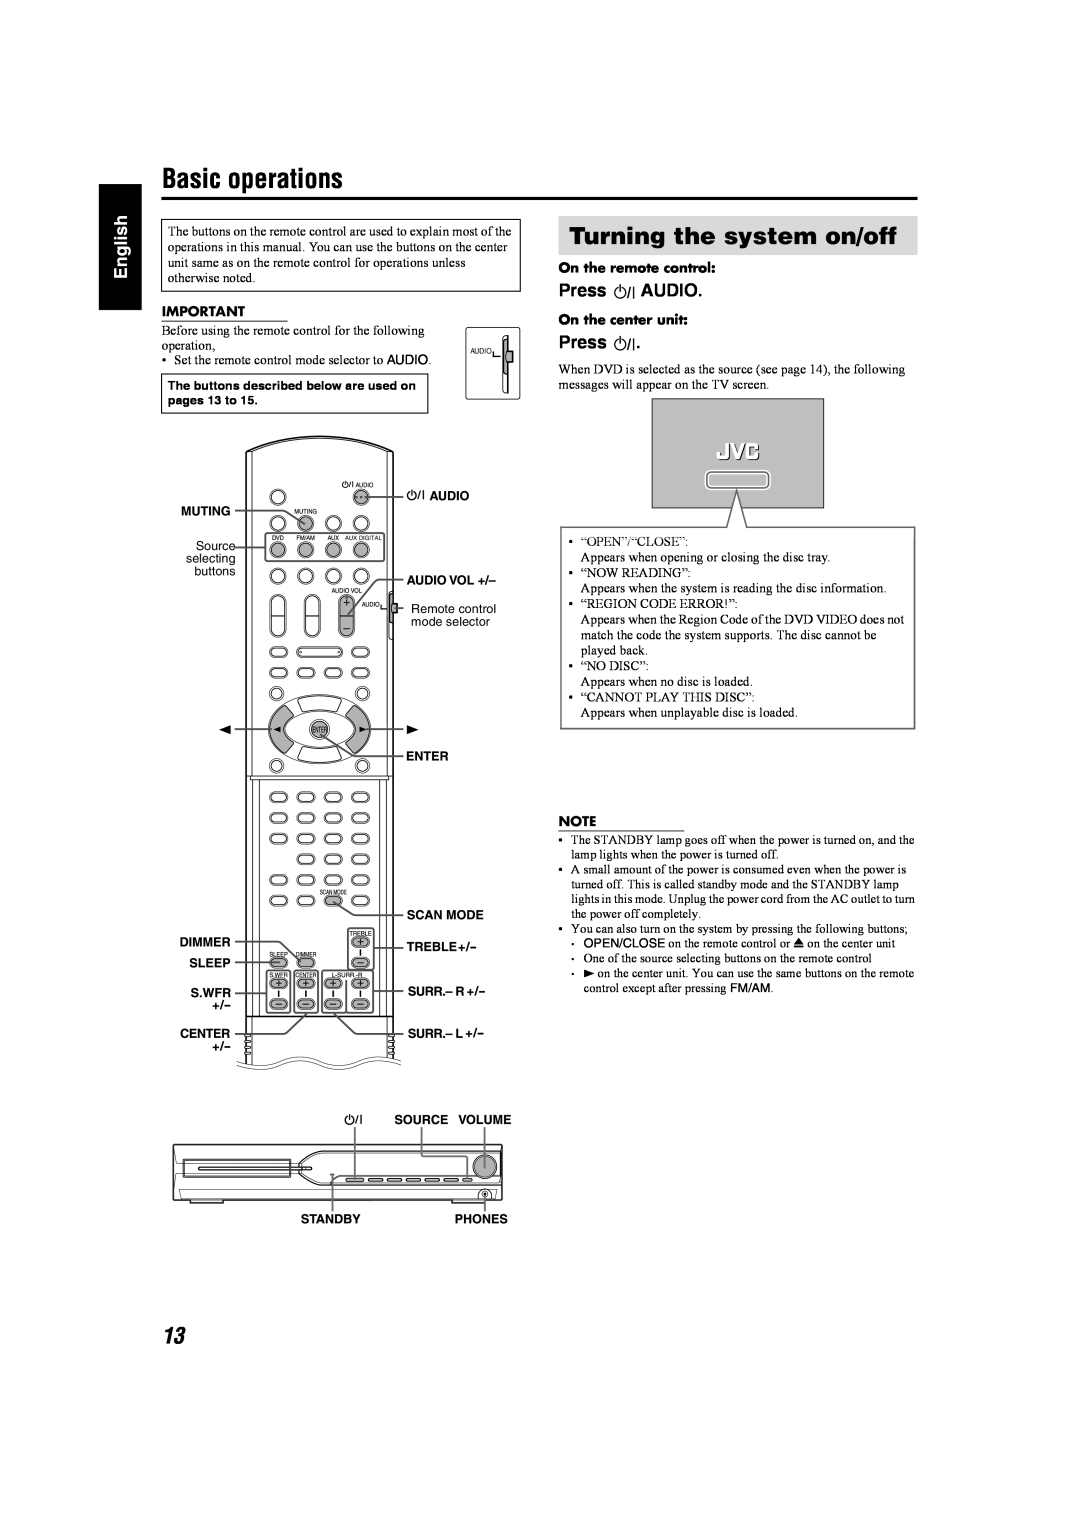 JVC GVT0141-003A manual Basic operations, Turning the system on/off, Press AUDIO, On the remote control, On the center unit 